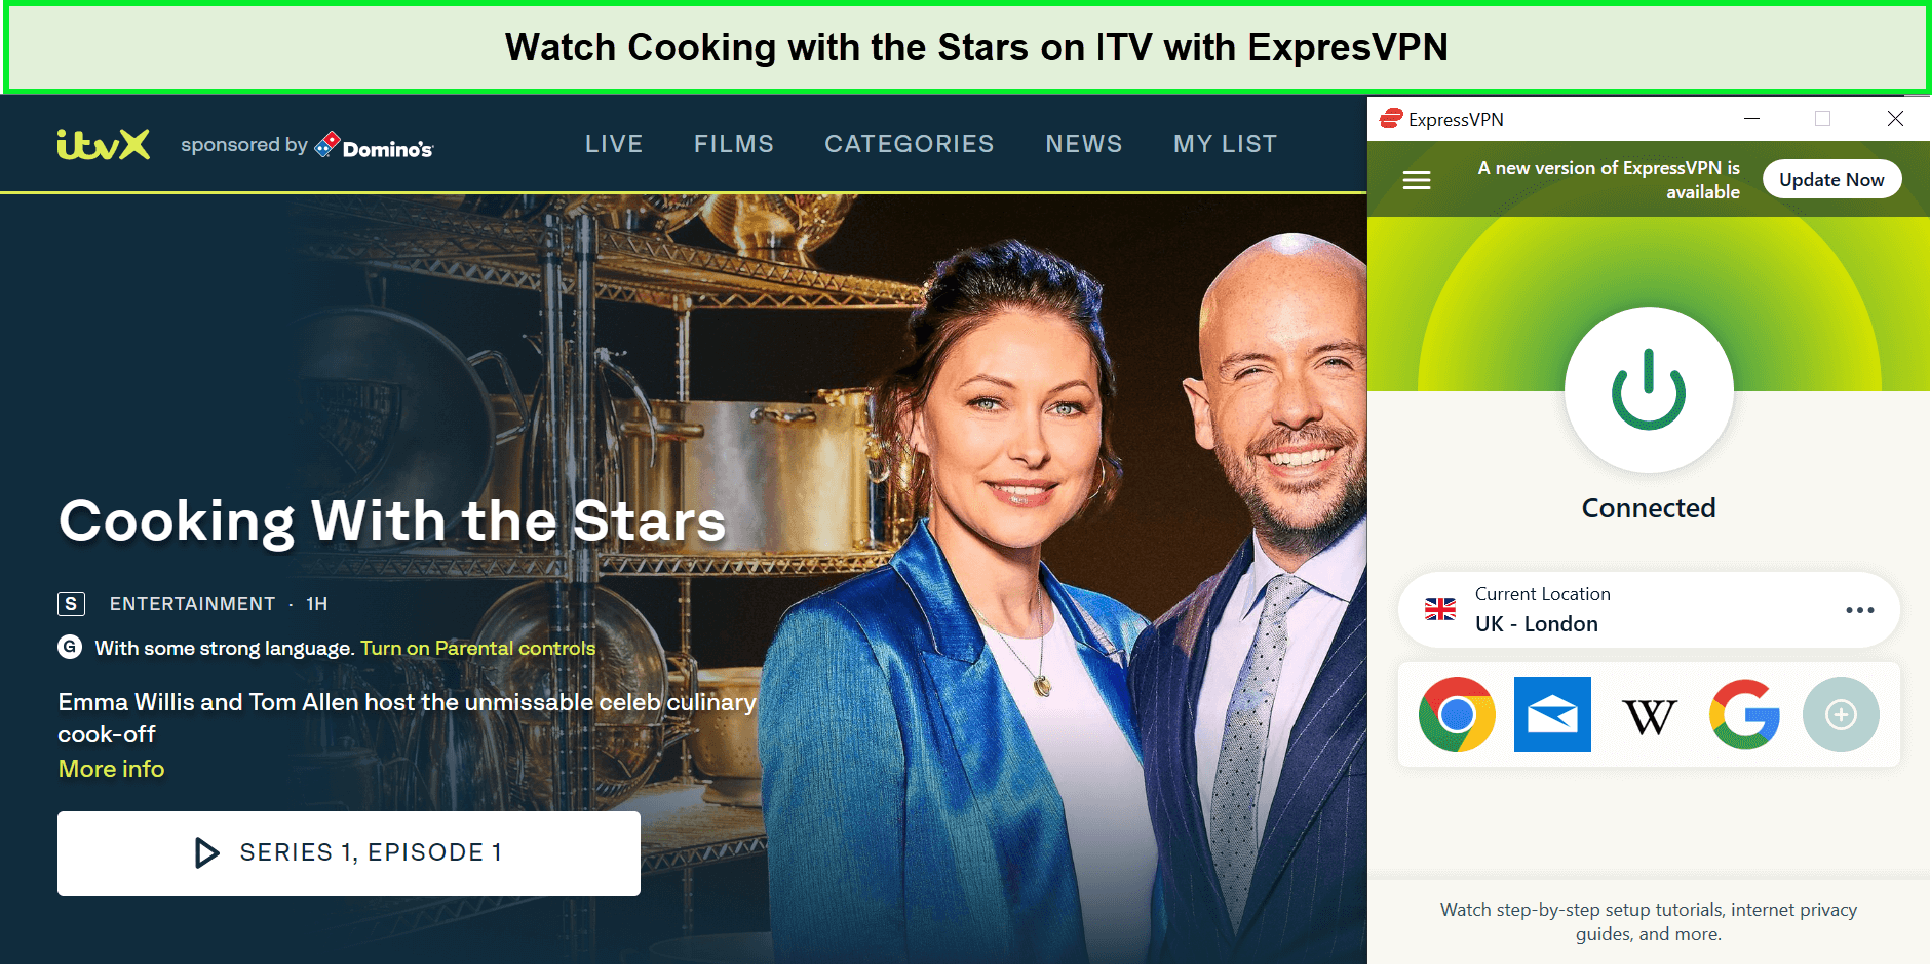 Watch-Cooking-with-the-Stars-Season-3-in-France-on-ITV-with-ExpresVPN